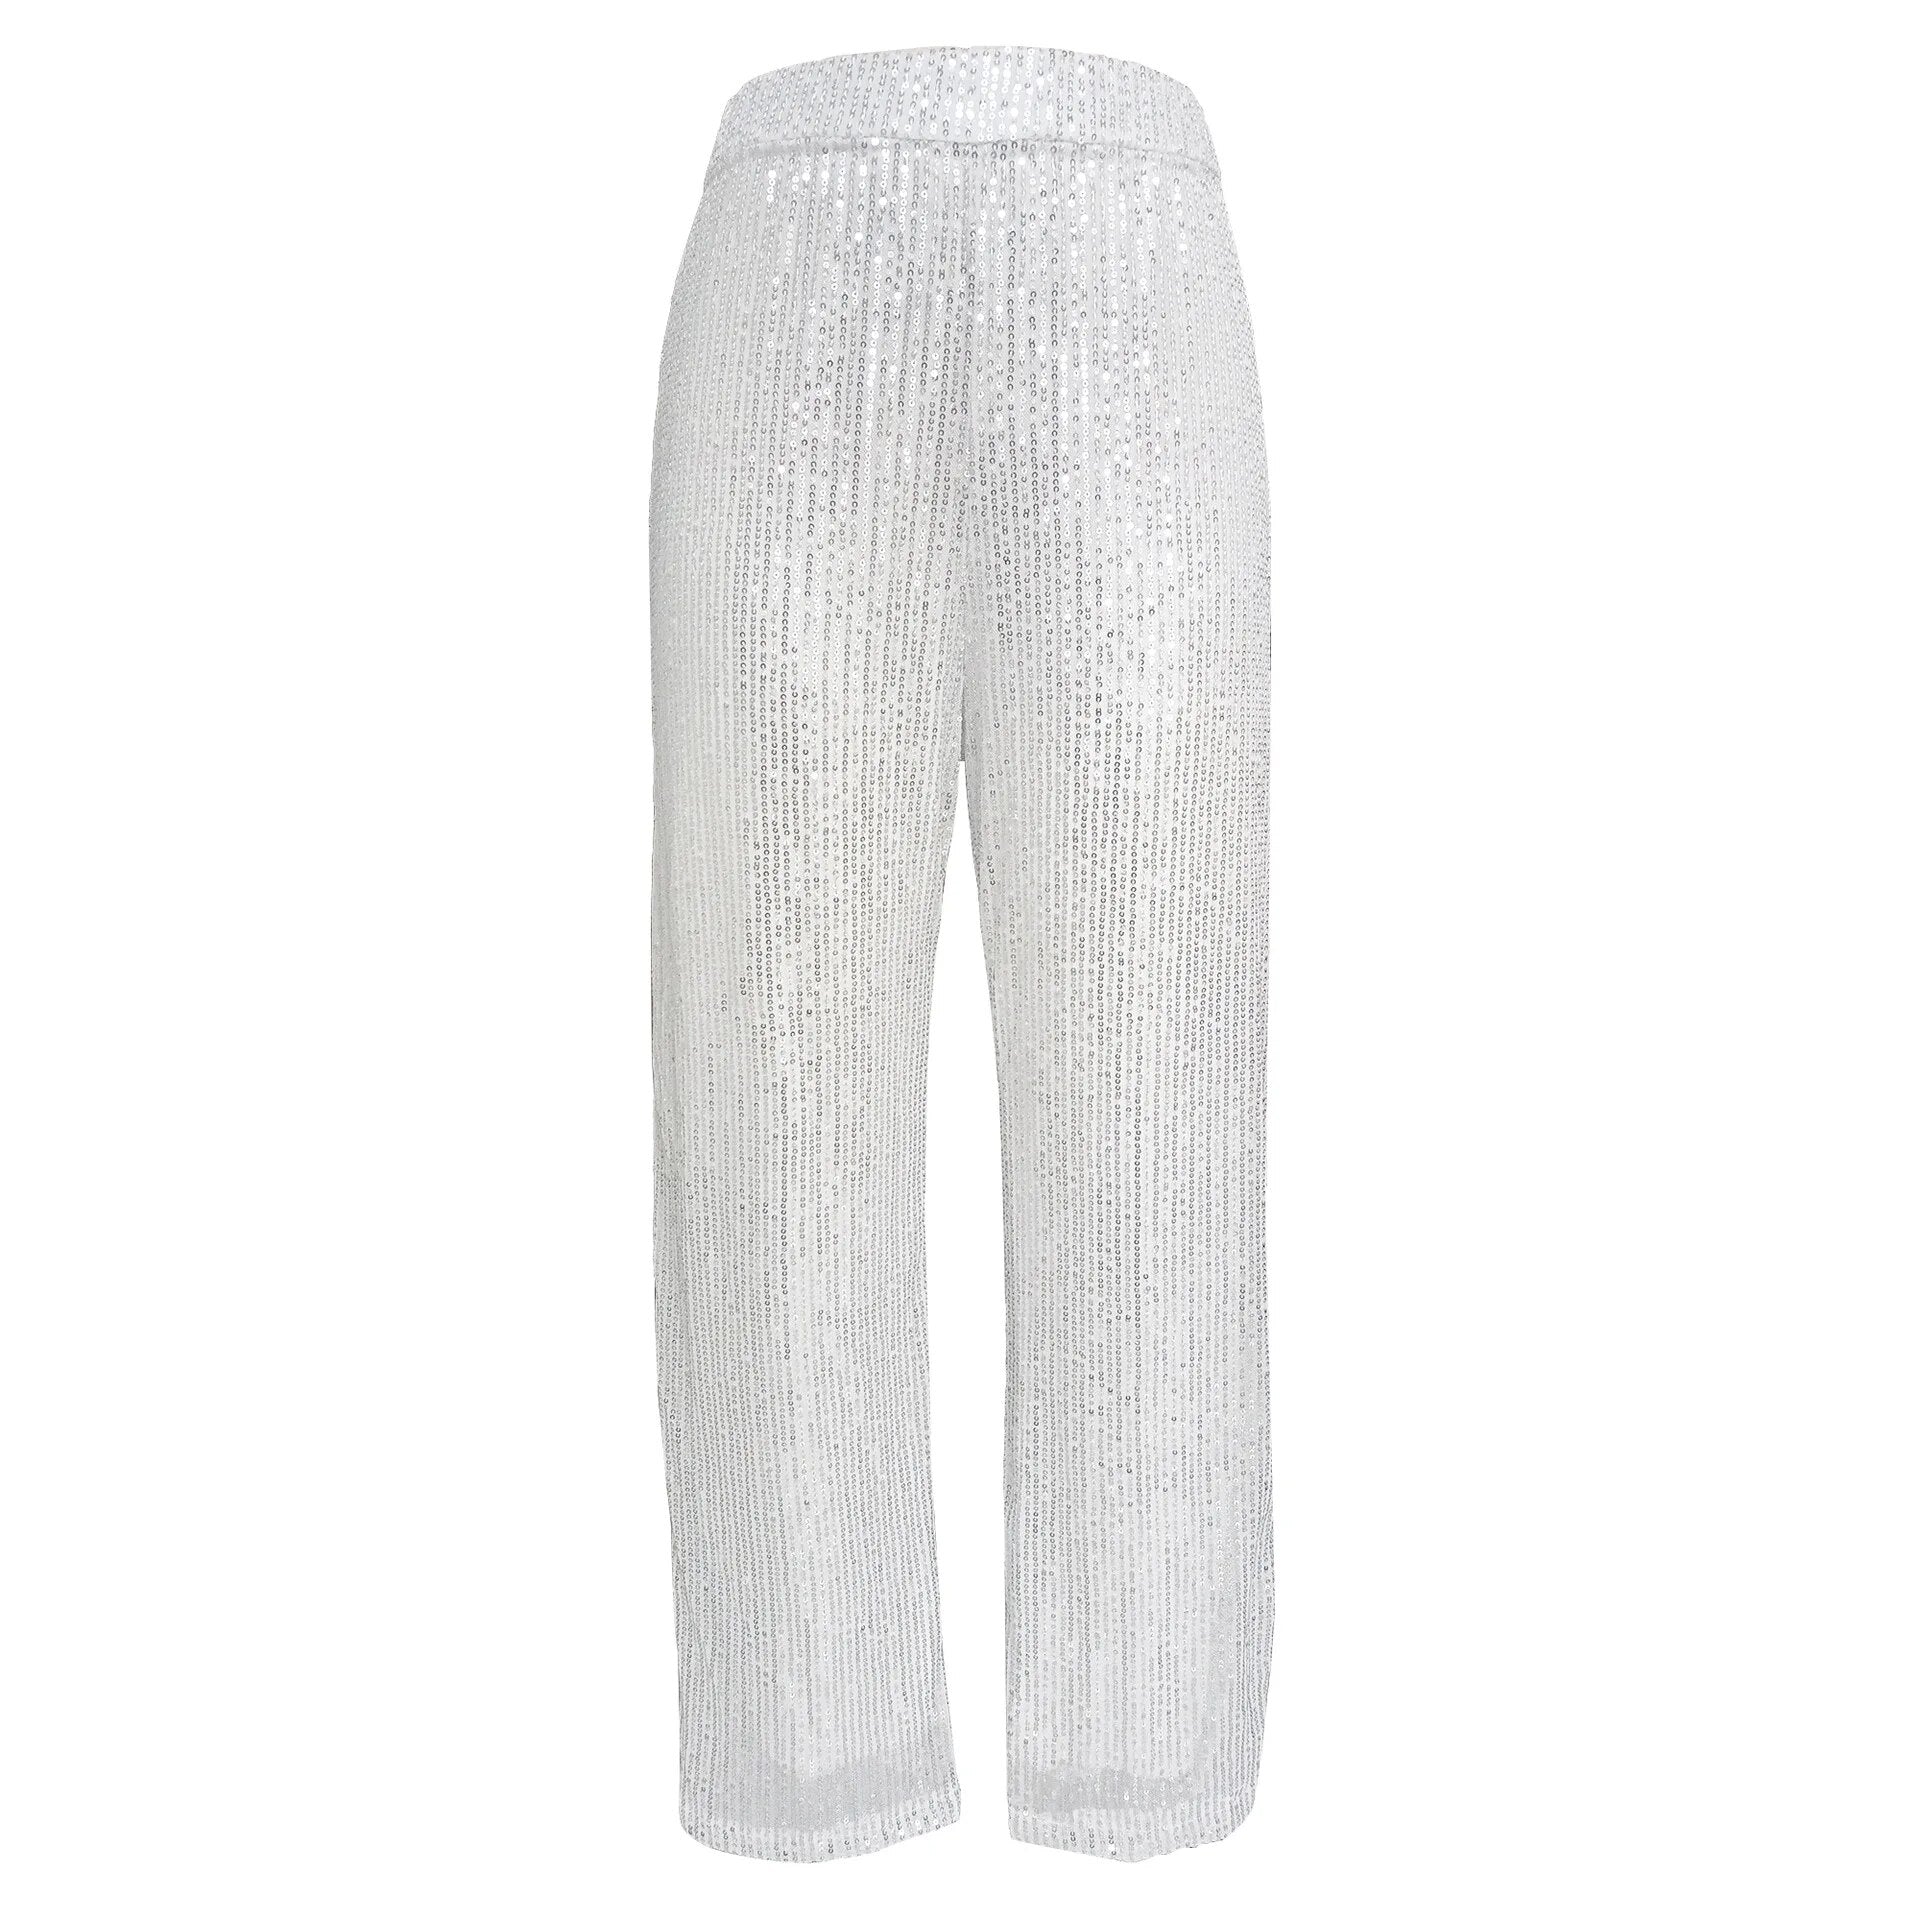 Silver Sequin Female Trousers High Waist Casual Luxury Party Outfit Trousers Fashion High Street Sparkle Straight Legg New Aiertu